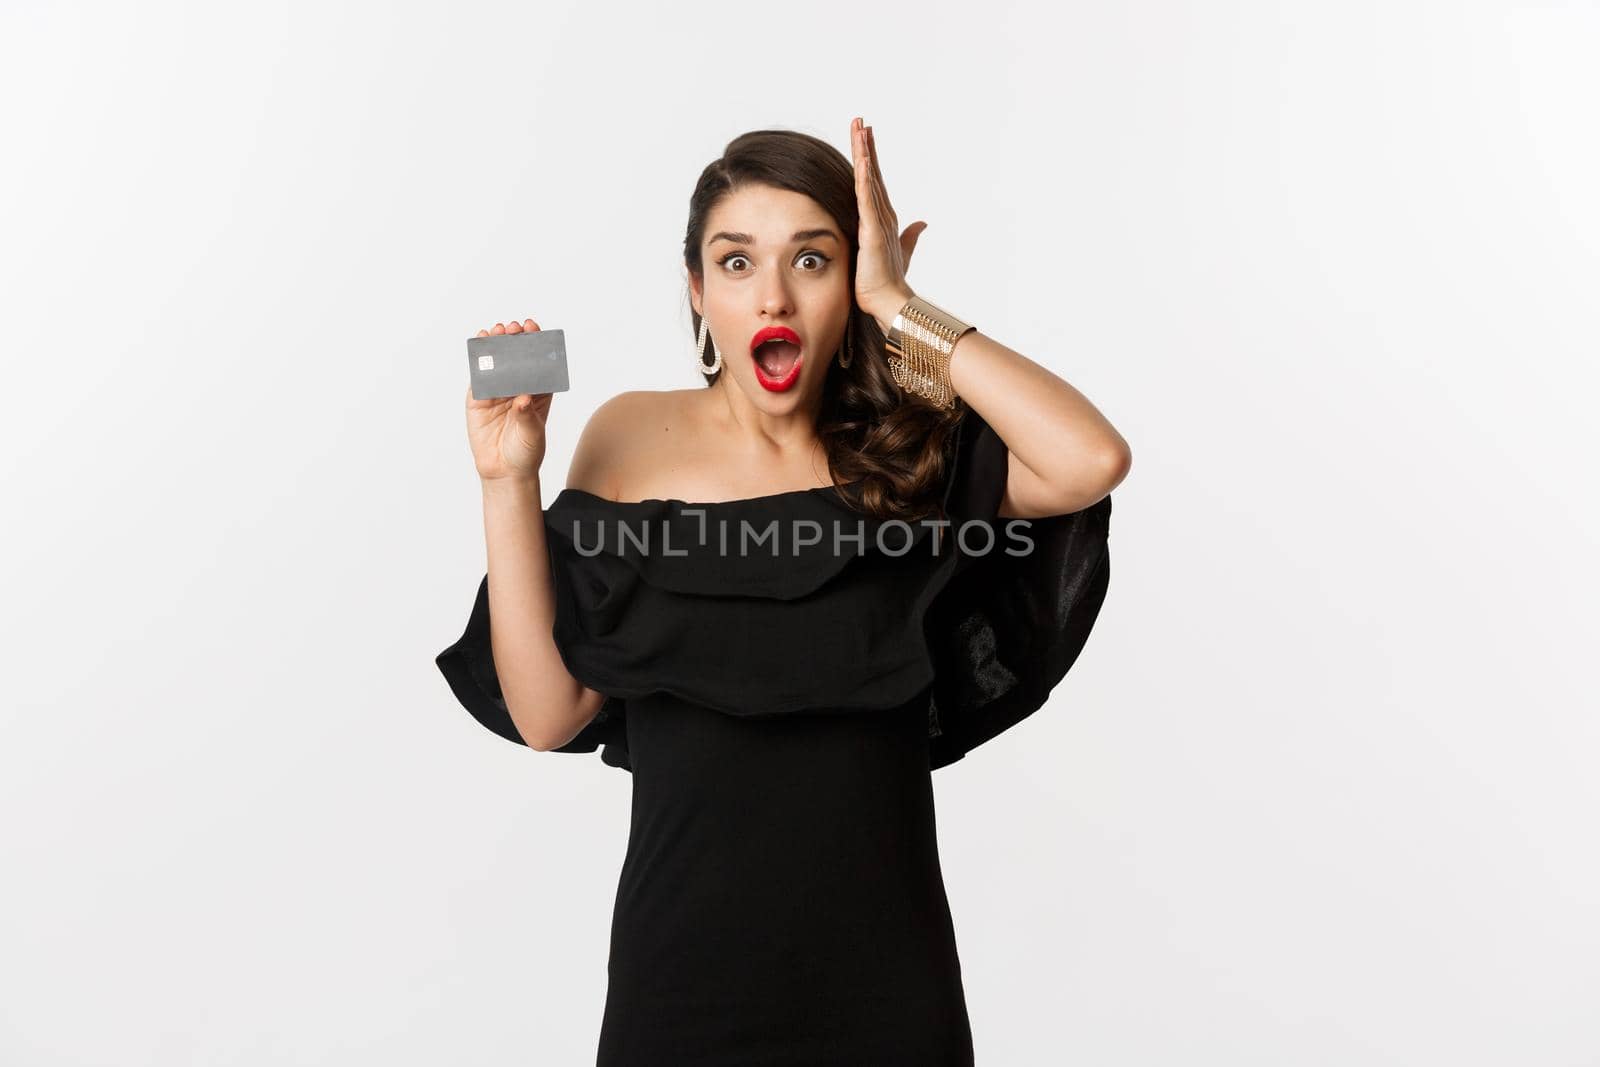 Fashion and shopping concept. Shocked woman in black dress showing credit card, looking in awe at camera, white background.